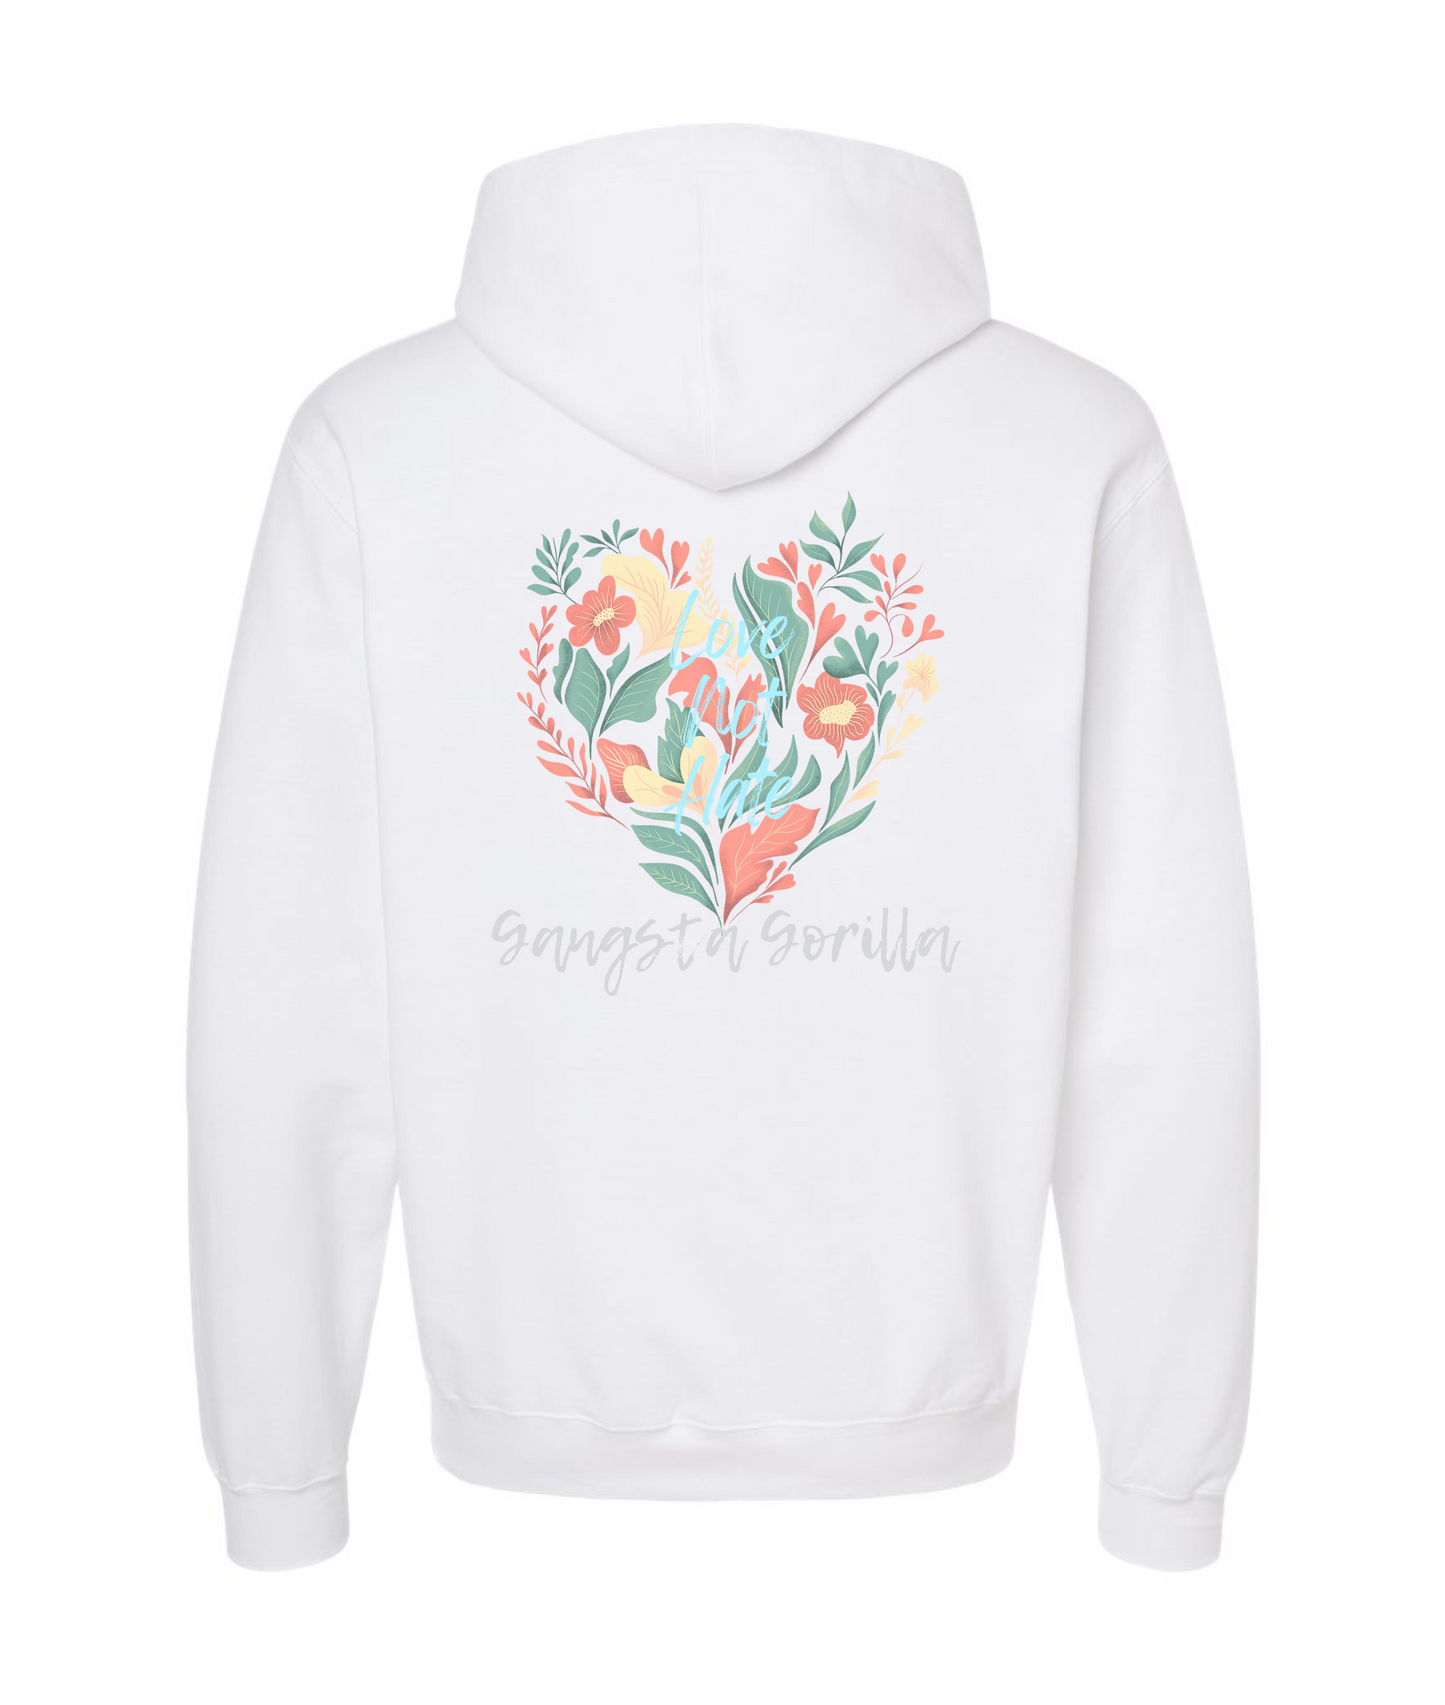 Gangsta Gorilla Extracts and Apparel - LOVE NOT HATE - White Hoodie